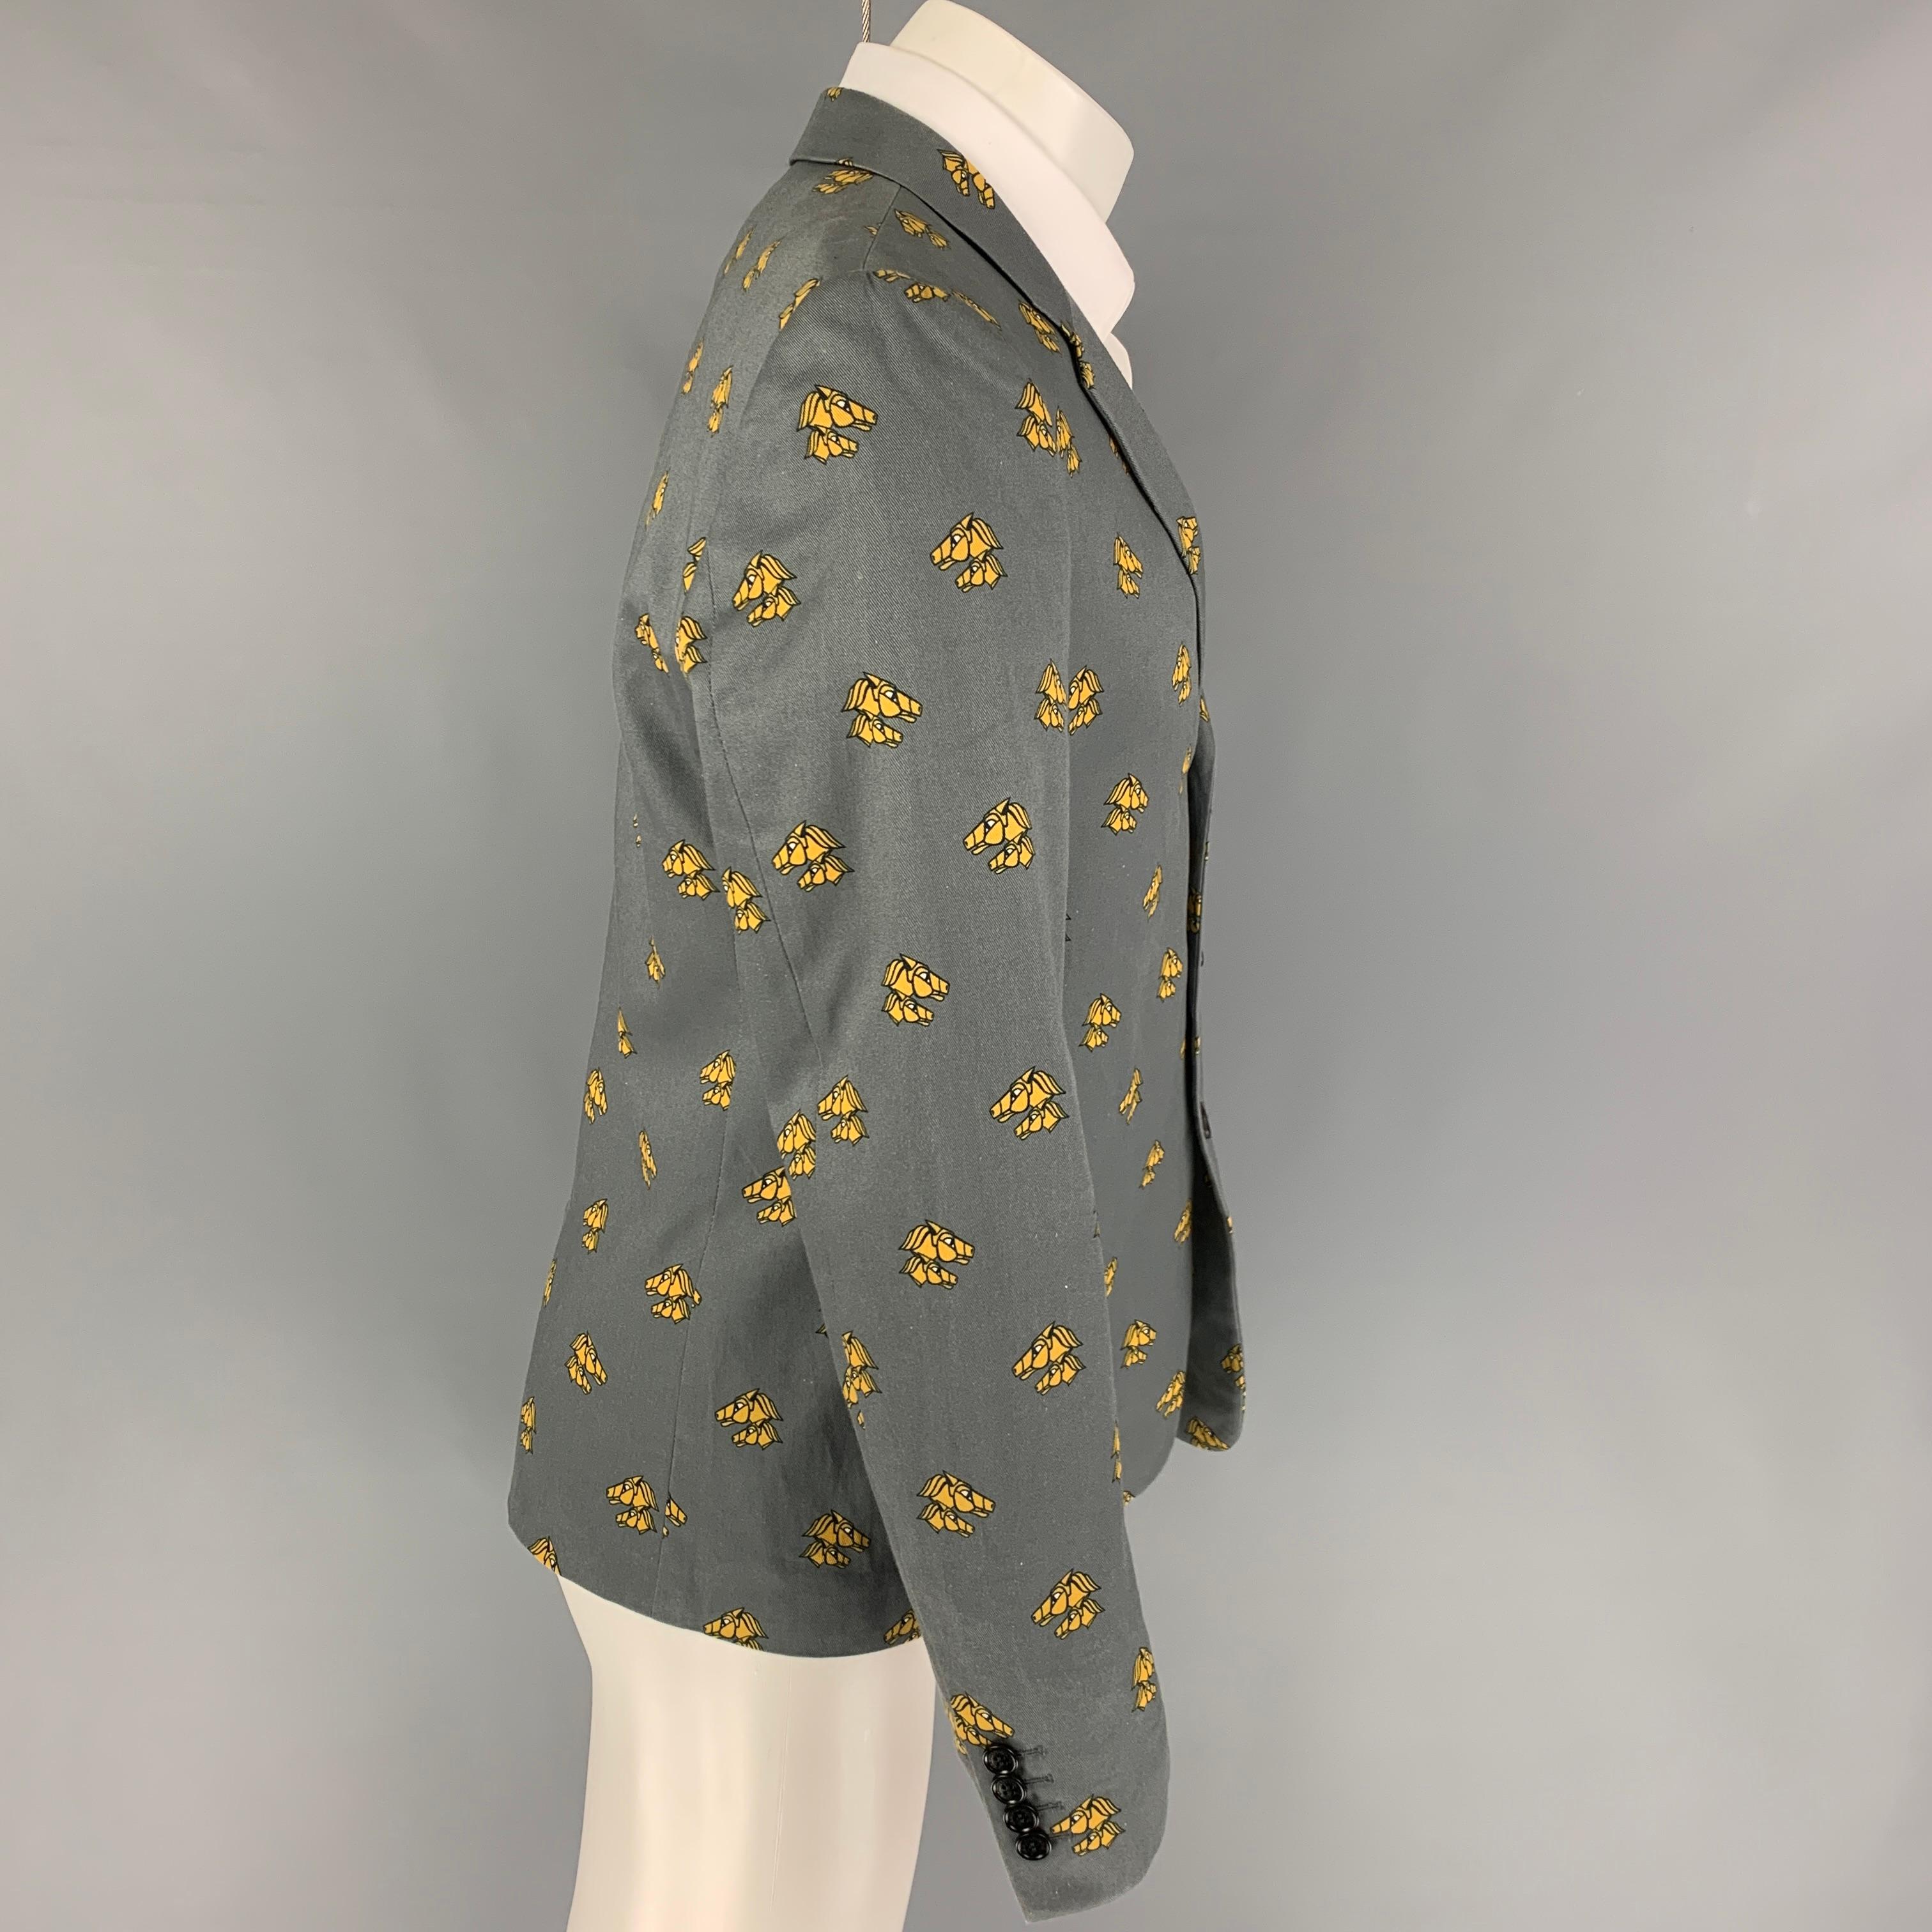 KRIS VAN ASSCHE sport coat comes in a grey & mustard print polyester with a full liner featuring a notch lapel, slit pockets, single back vent, and a three button closure. 

Very Good Pre-Owned Condition.
Marked: 50

Measurements:

Shoulder: 17.5